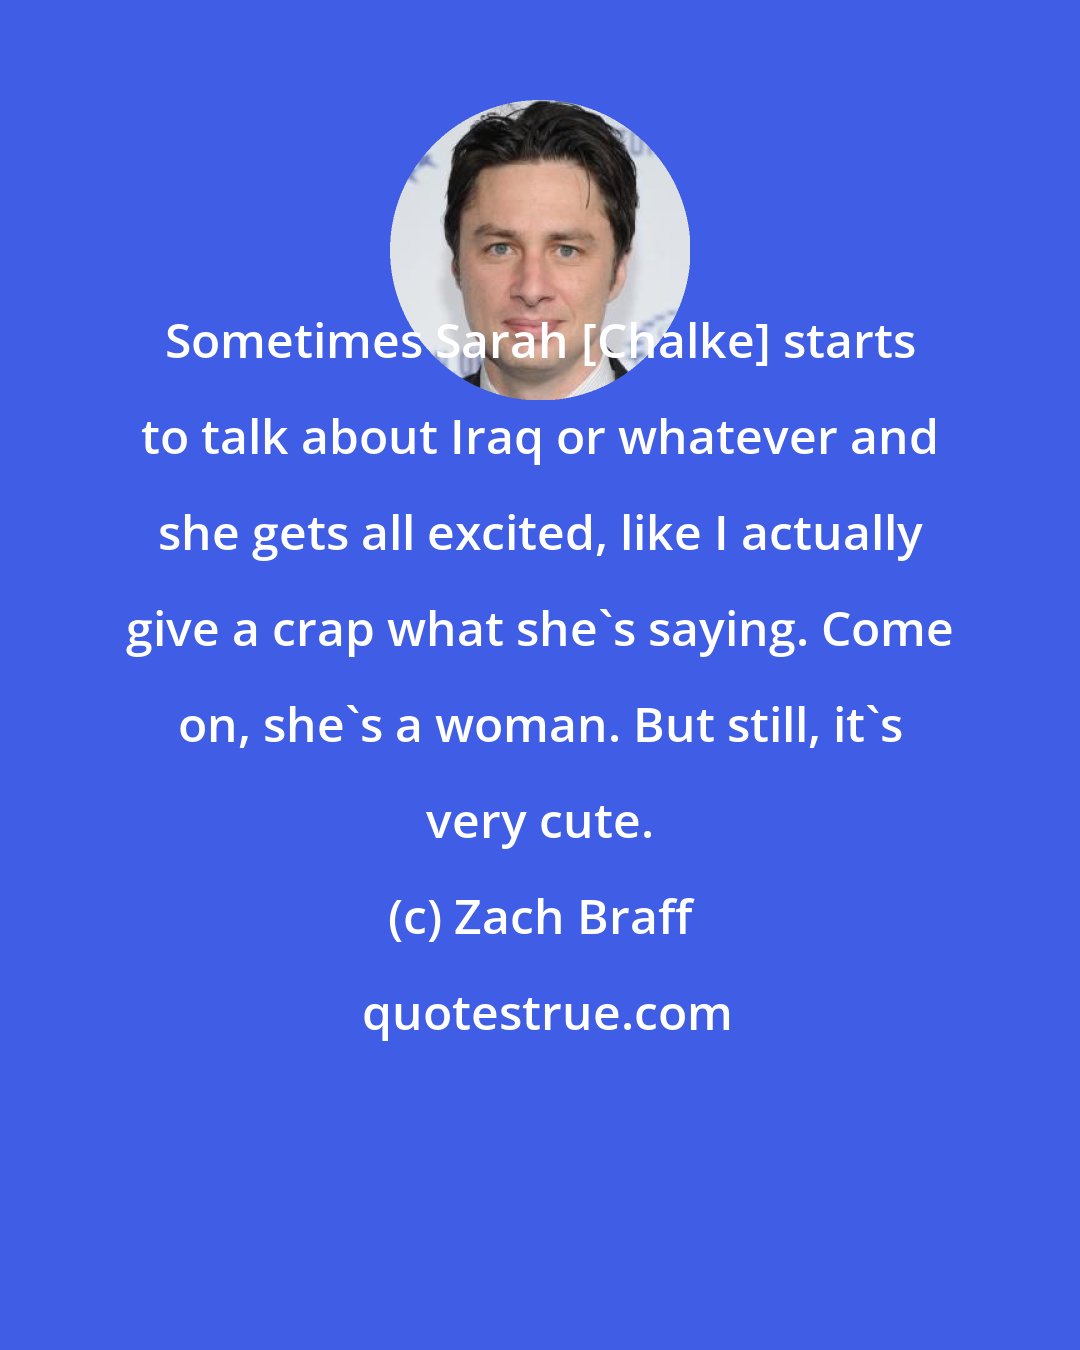 Zach Braff: Sometimes Sarah [Chalke] starts to talk about Iraq or whatever and she gets all excited, like I actually give a crap what she's saying. Come on, she's a woman. But still, it's very cute.